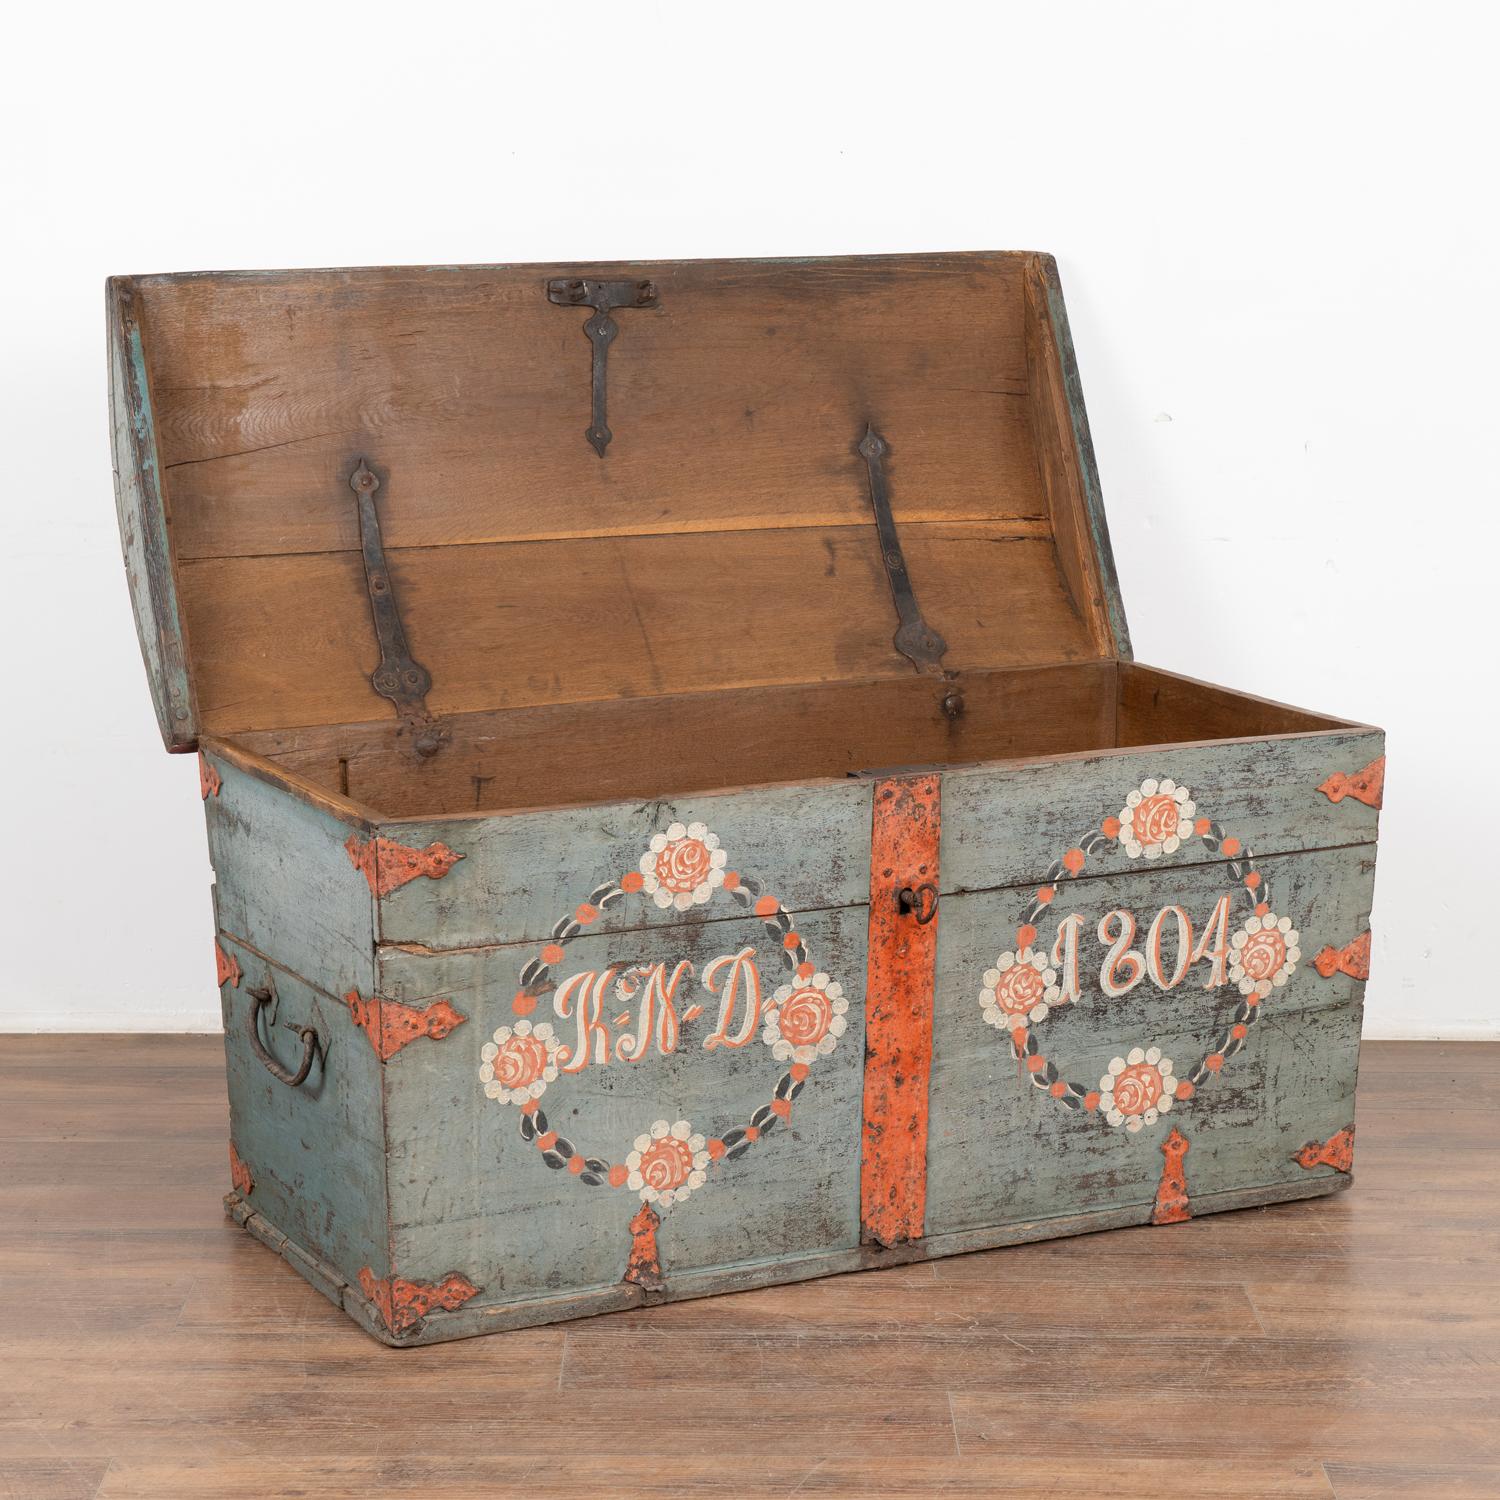 Folk Art Original Blue Painted Dome Top Trunk from Sweden dated 1804 For Sale